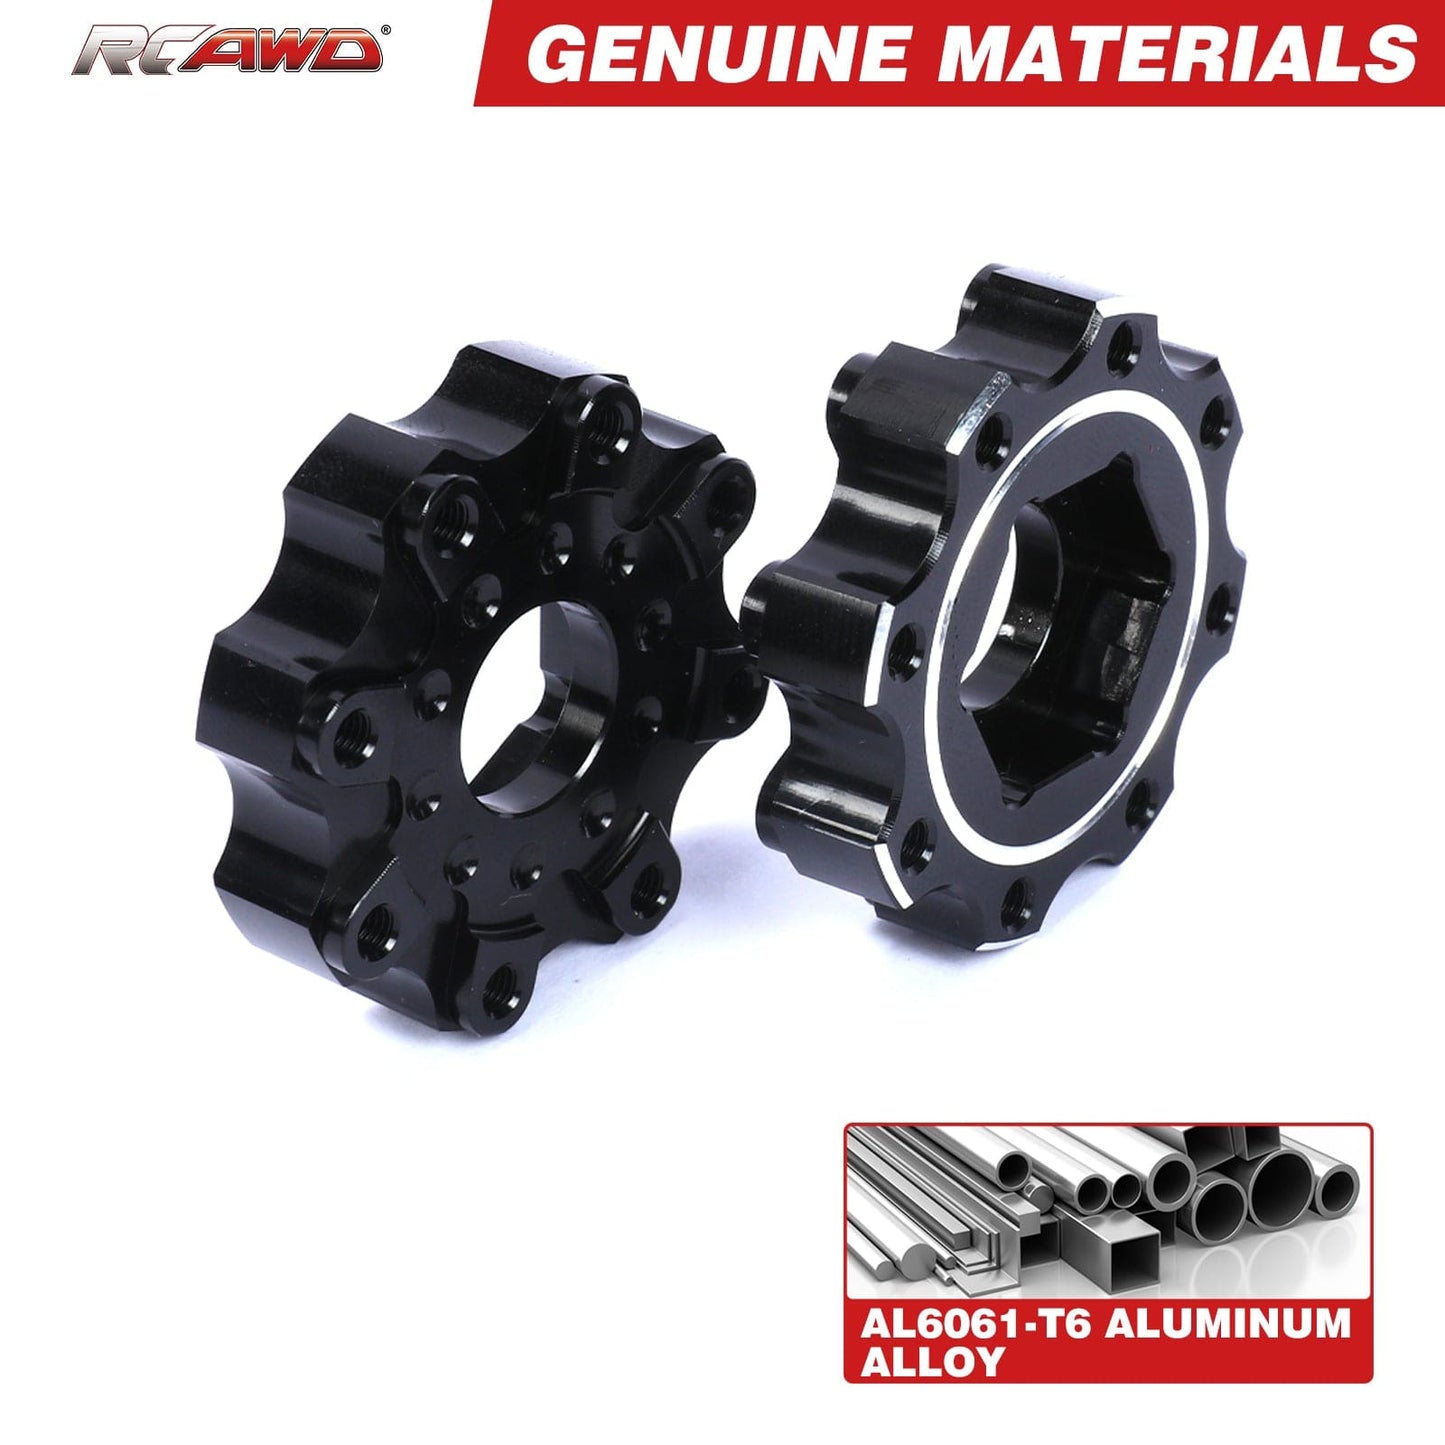 RCAWD UNIHEX 1/8 8x32 to 17mm ZERO Offset Aluminum Hex Adapters for Pro-line Narrow 3.8" TiresBlack